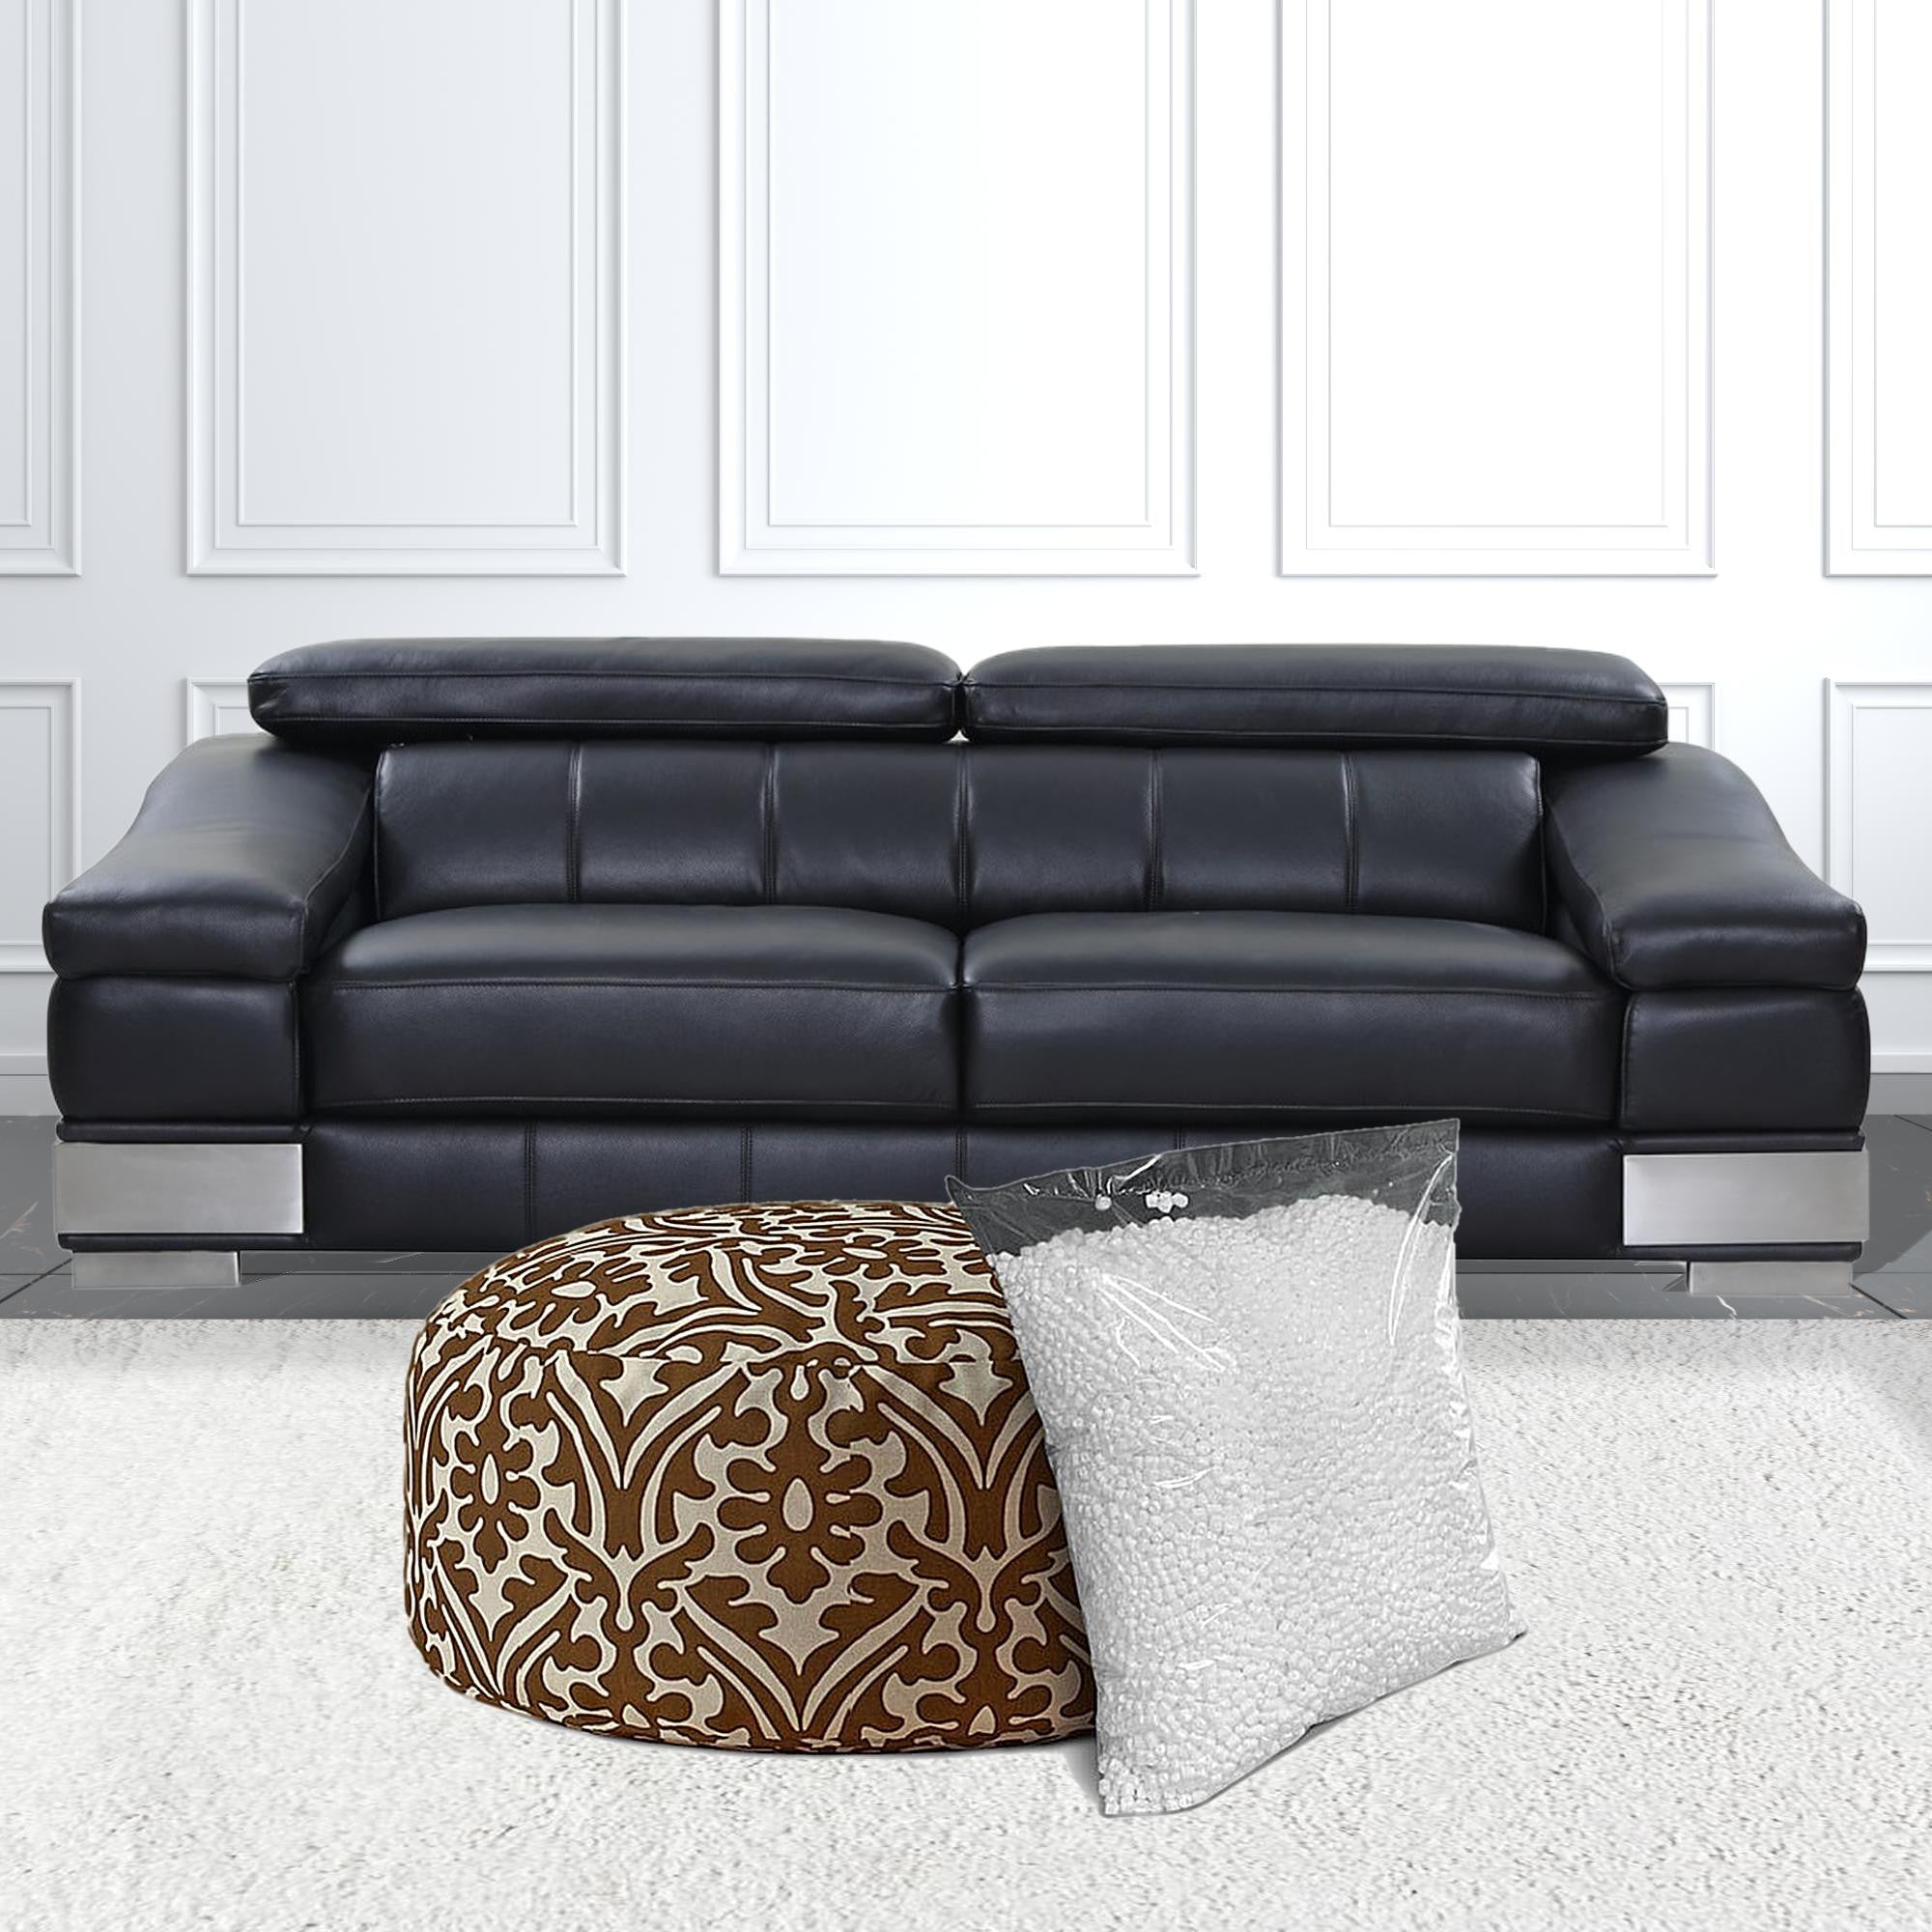 24" Brown Cotton Round Damask Pouf Cover